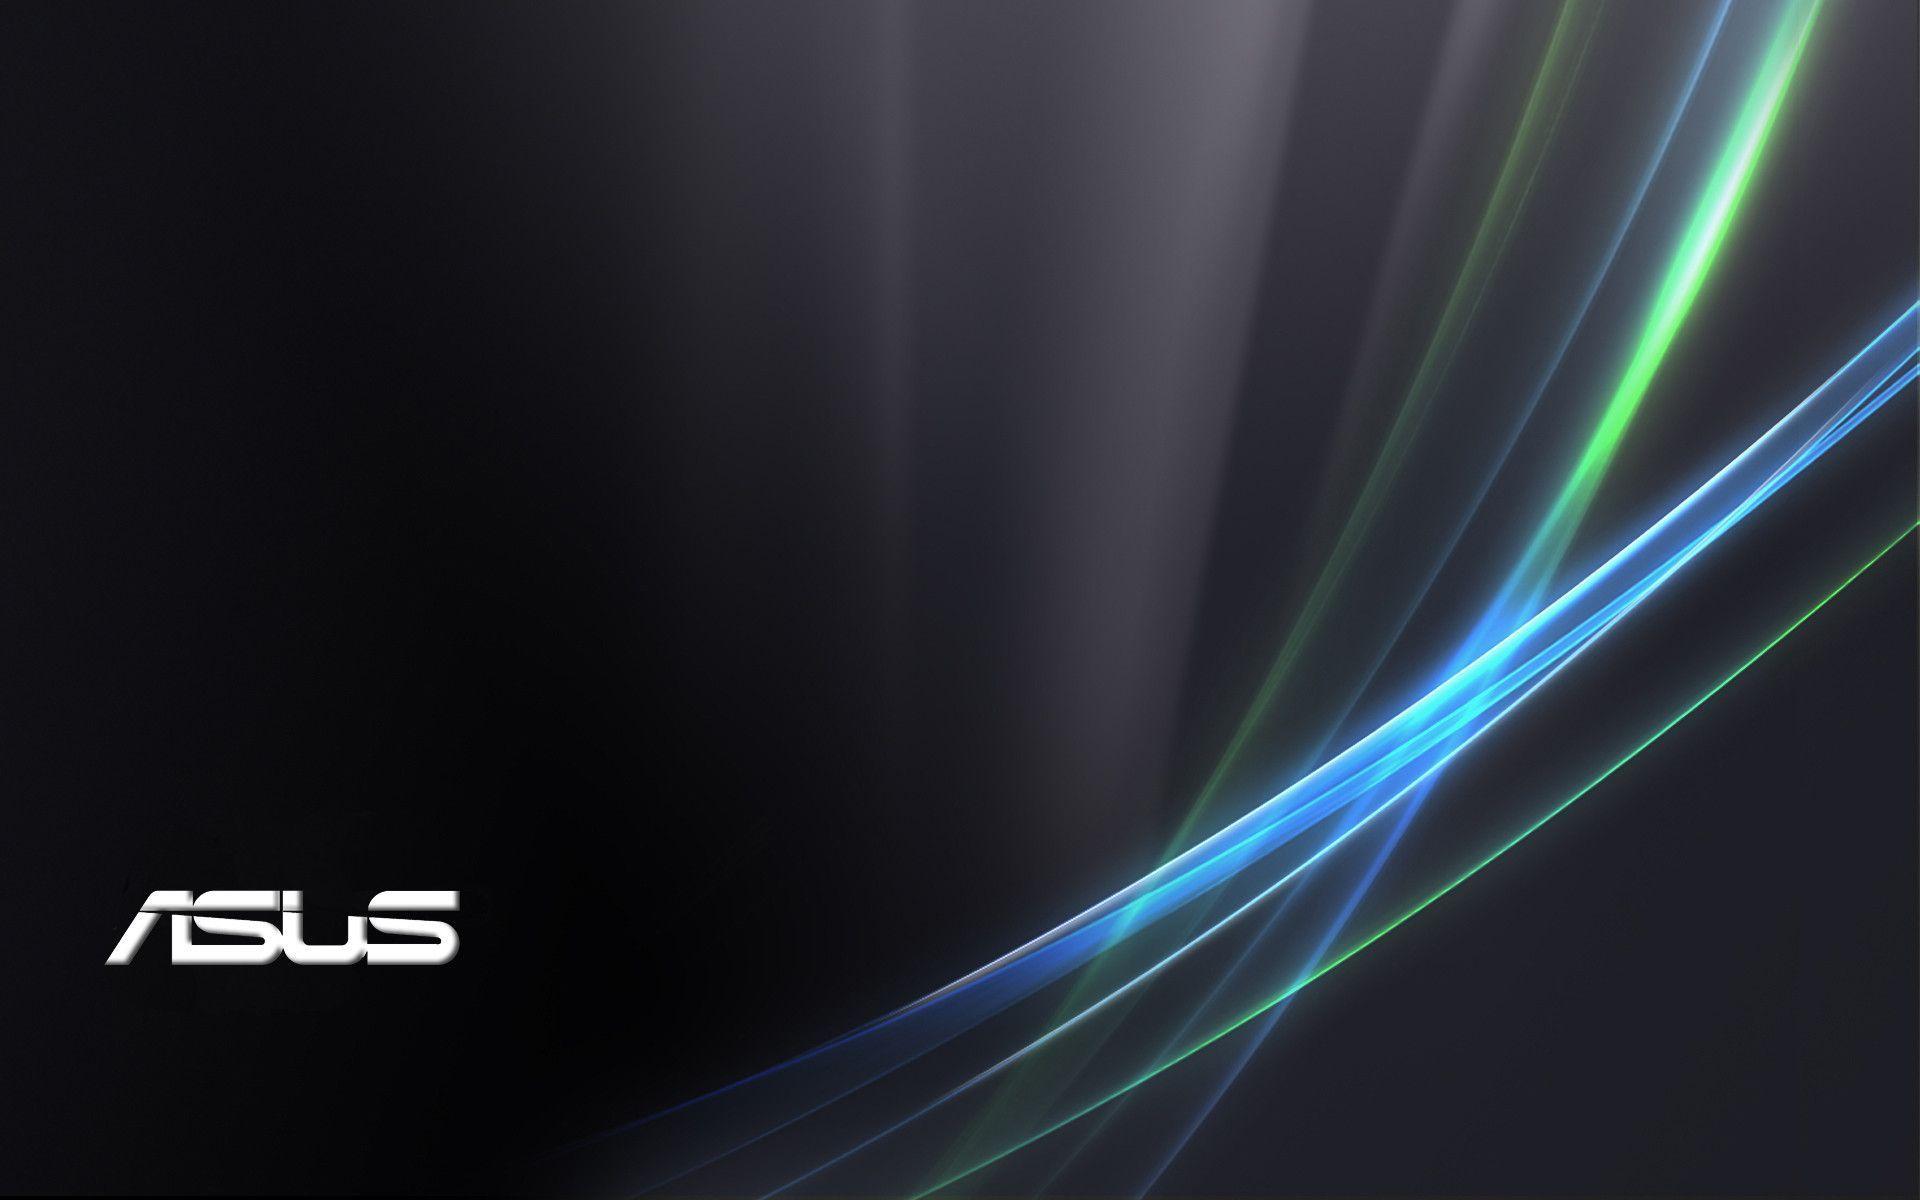 Asus Pc Wallpapers - Top Free Asus Pc Backgrounds - Wallpaperaccess